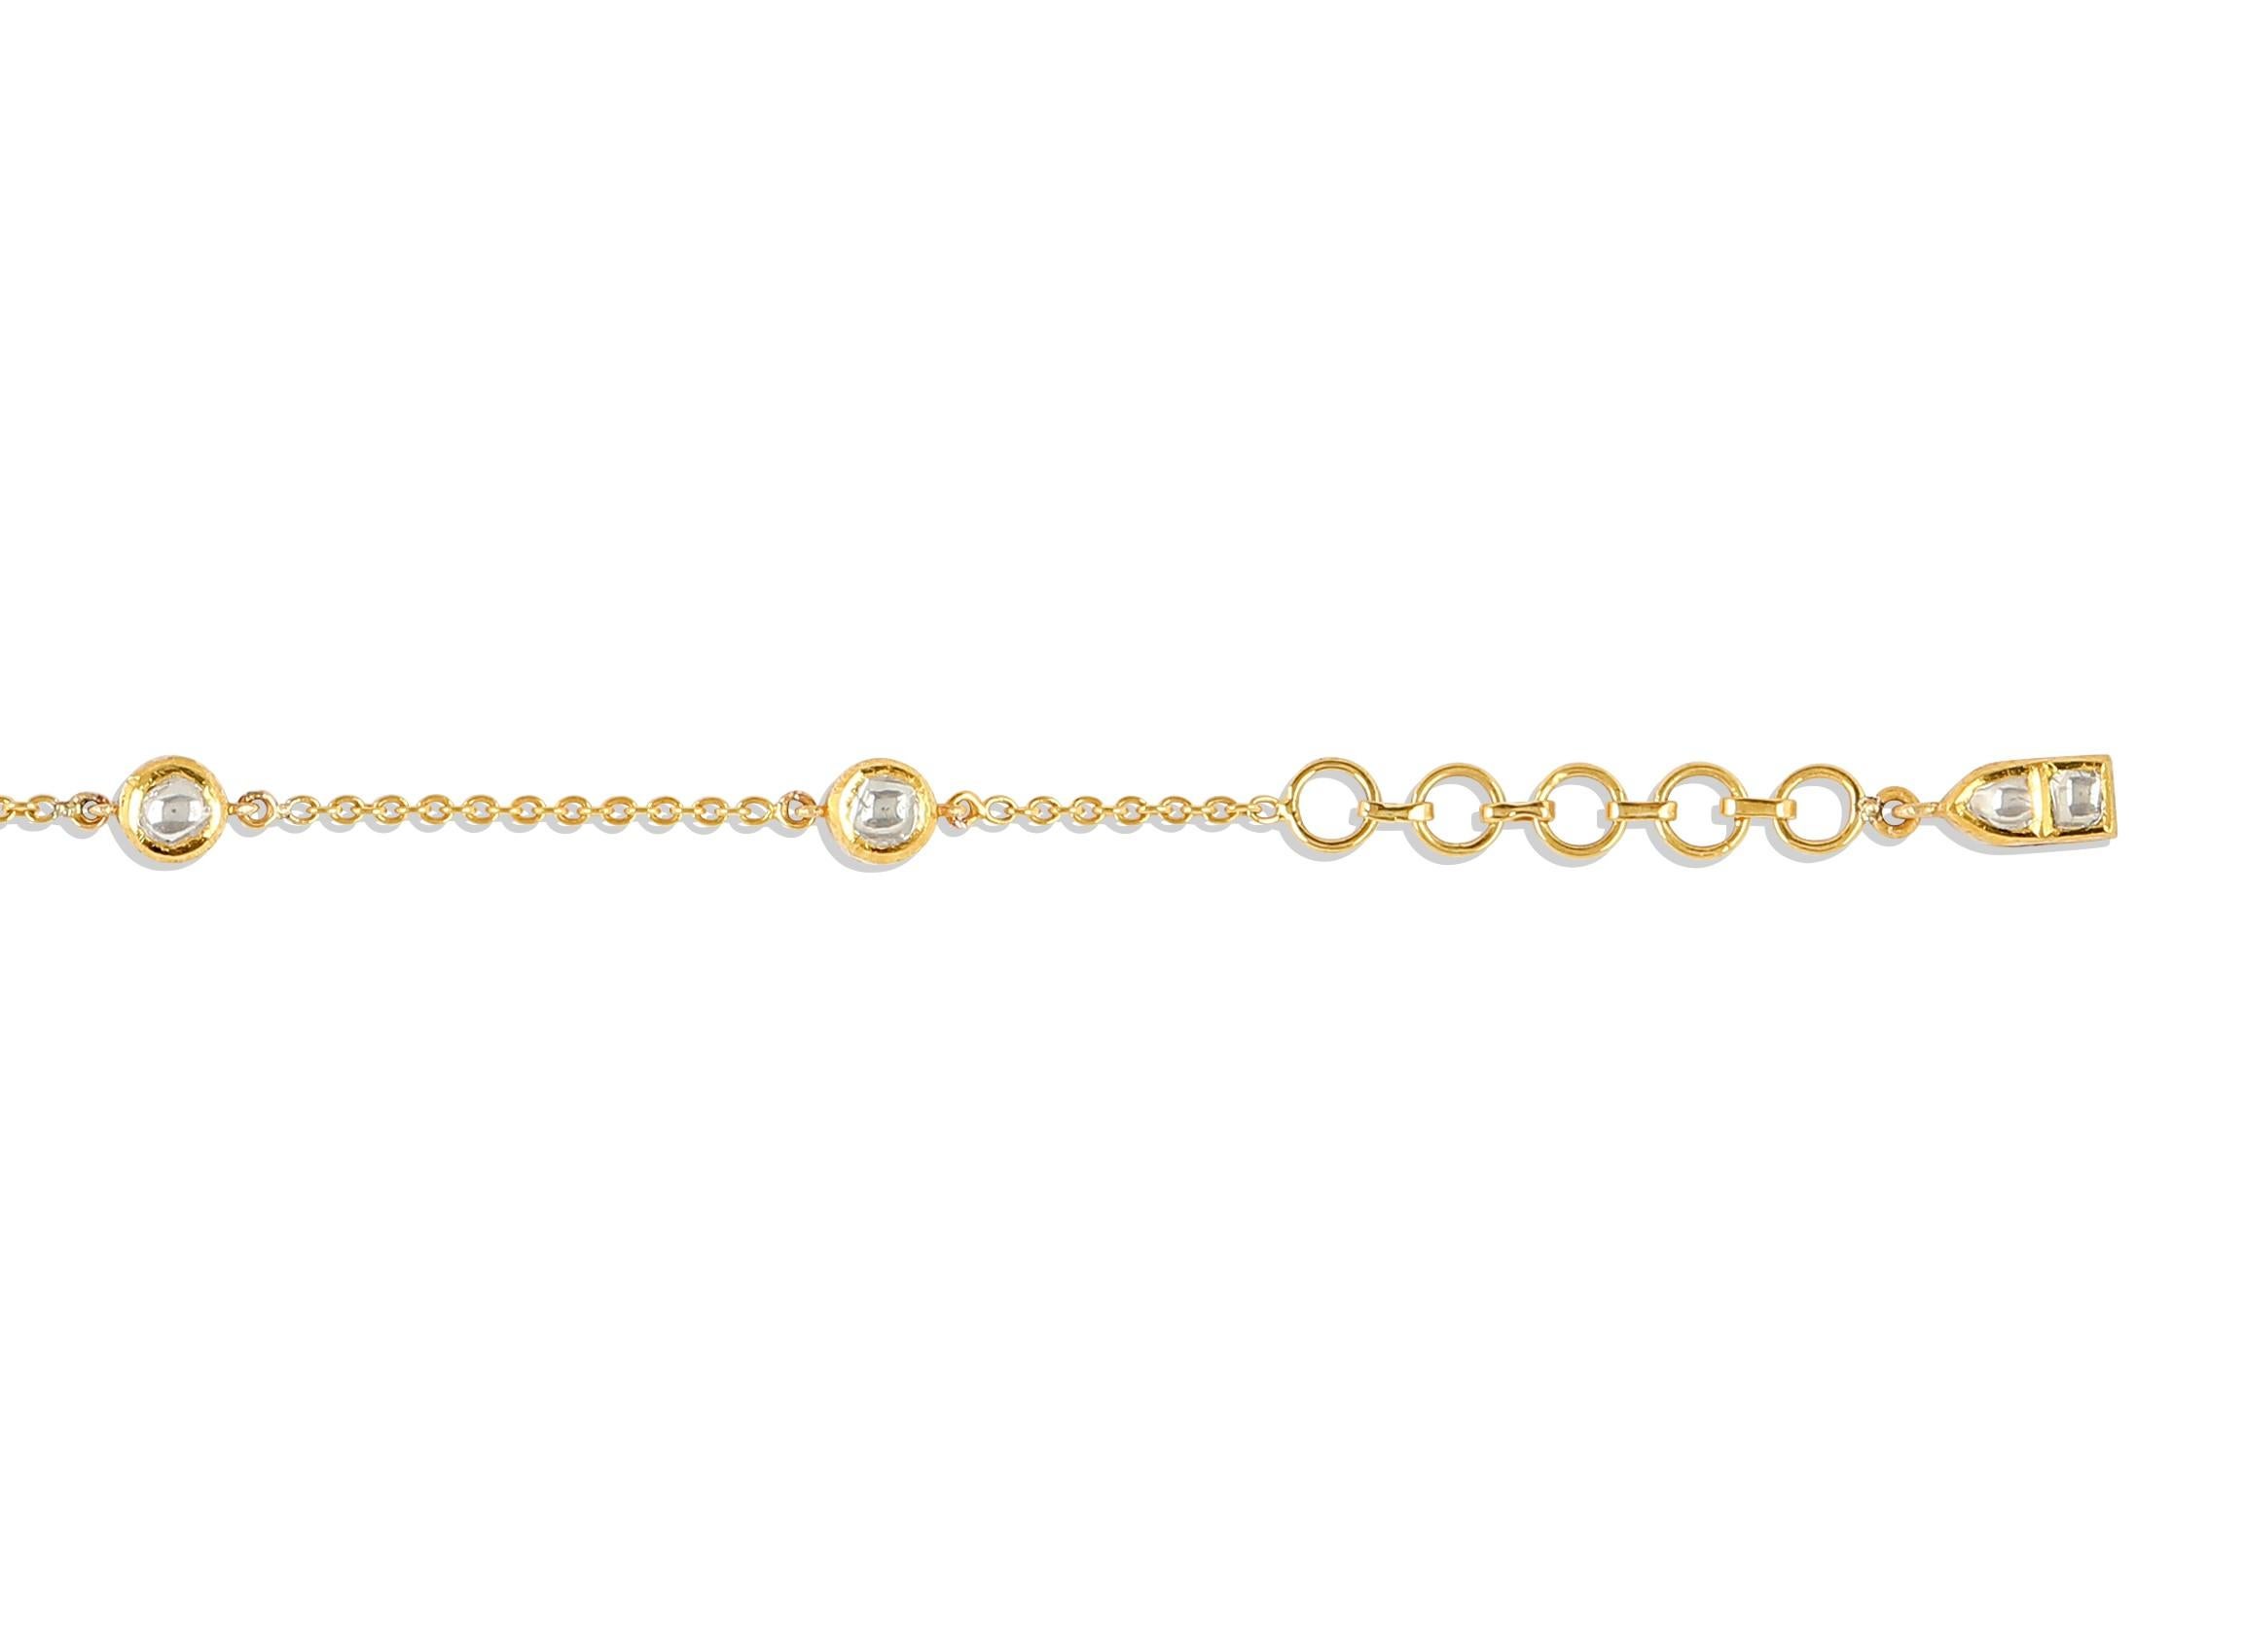 This striking bracelet is styled with Polki Diamonds (Uncut Diamonds) and is set in 18 Karat Yellow Gold. Designed to magnify your sparkle, this artistically and intricately crafted double-sided bracelet is reversible so the Polki Diamonds can shine